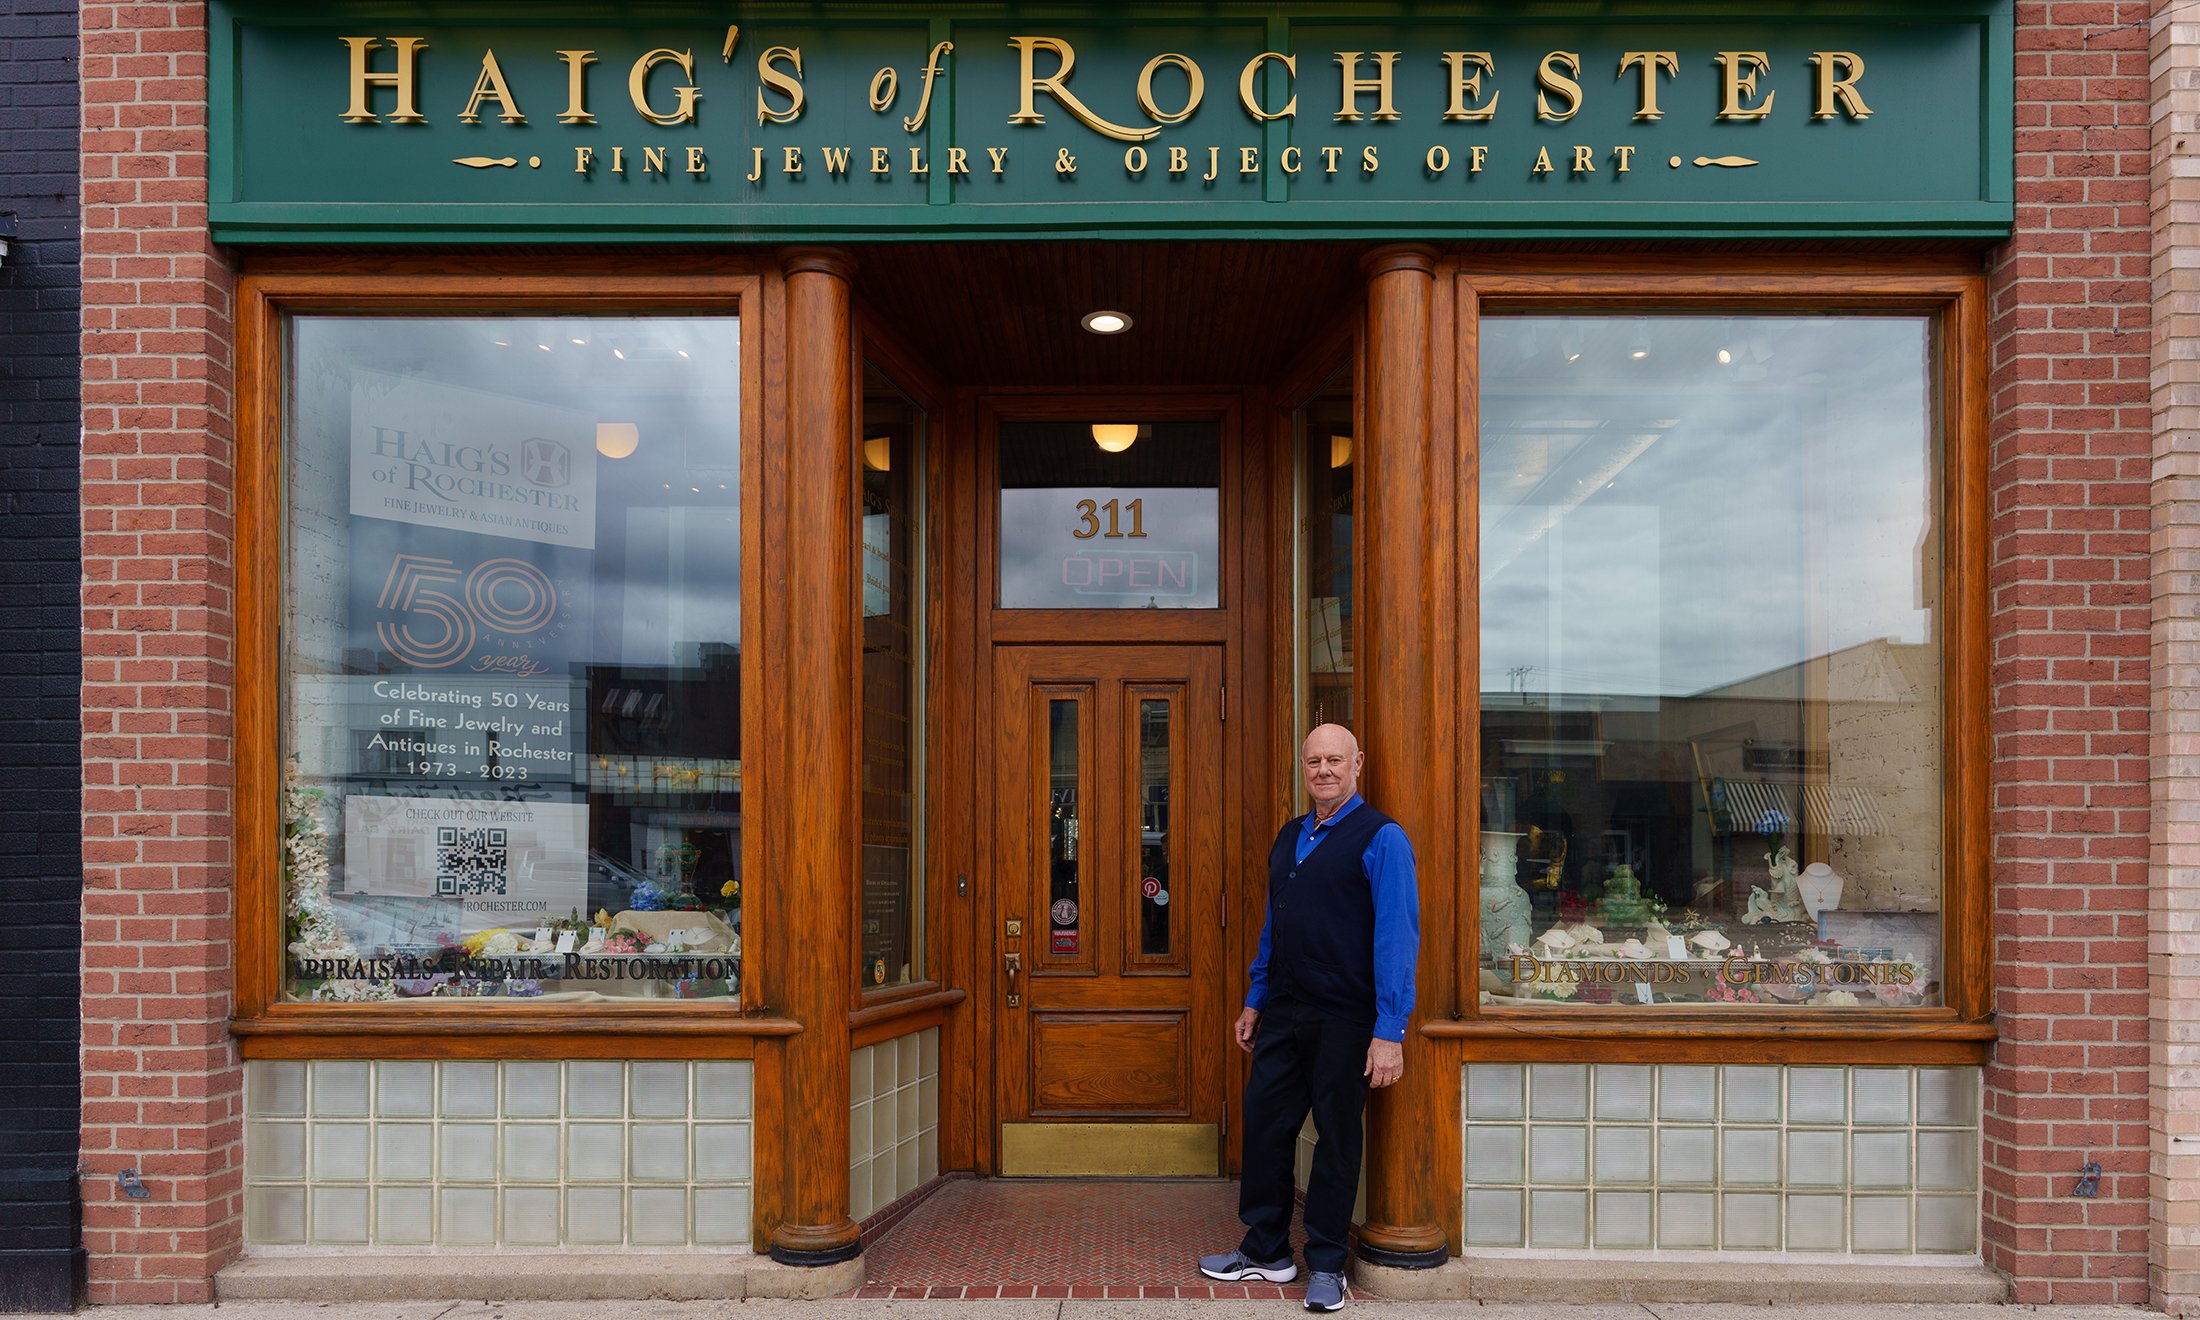 A man in front of his jewelry store with a sign that reads "Haig's of Rochester Fine Jewelry & Objects of Art"